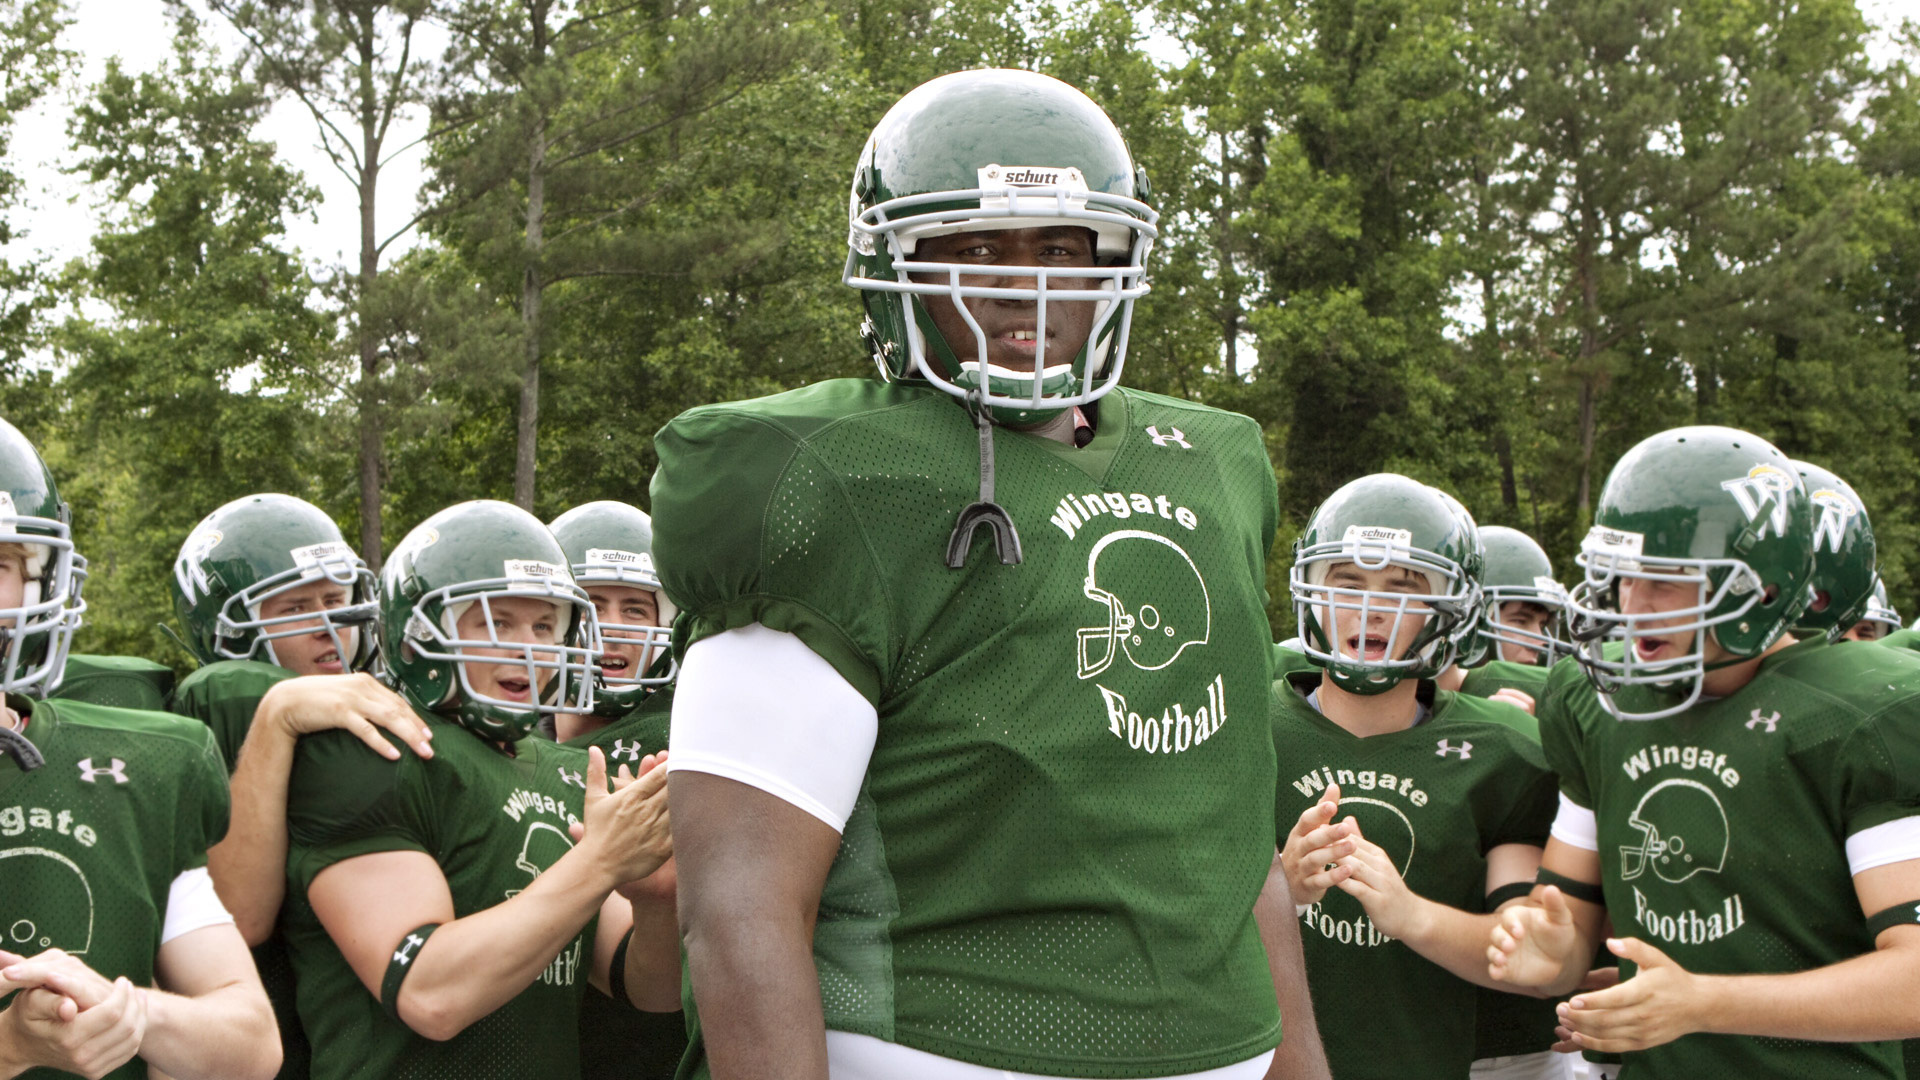 The Blind Side movie, HD wallpapers, Inspiring images, 4K quality, 1920x1080 Full HD Desktop